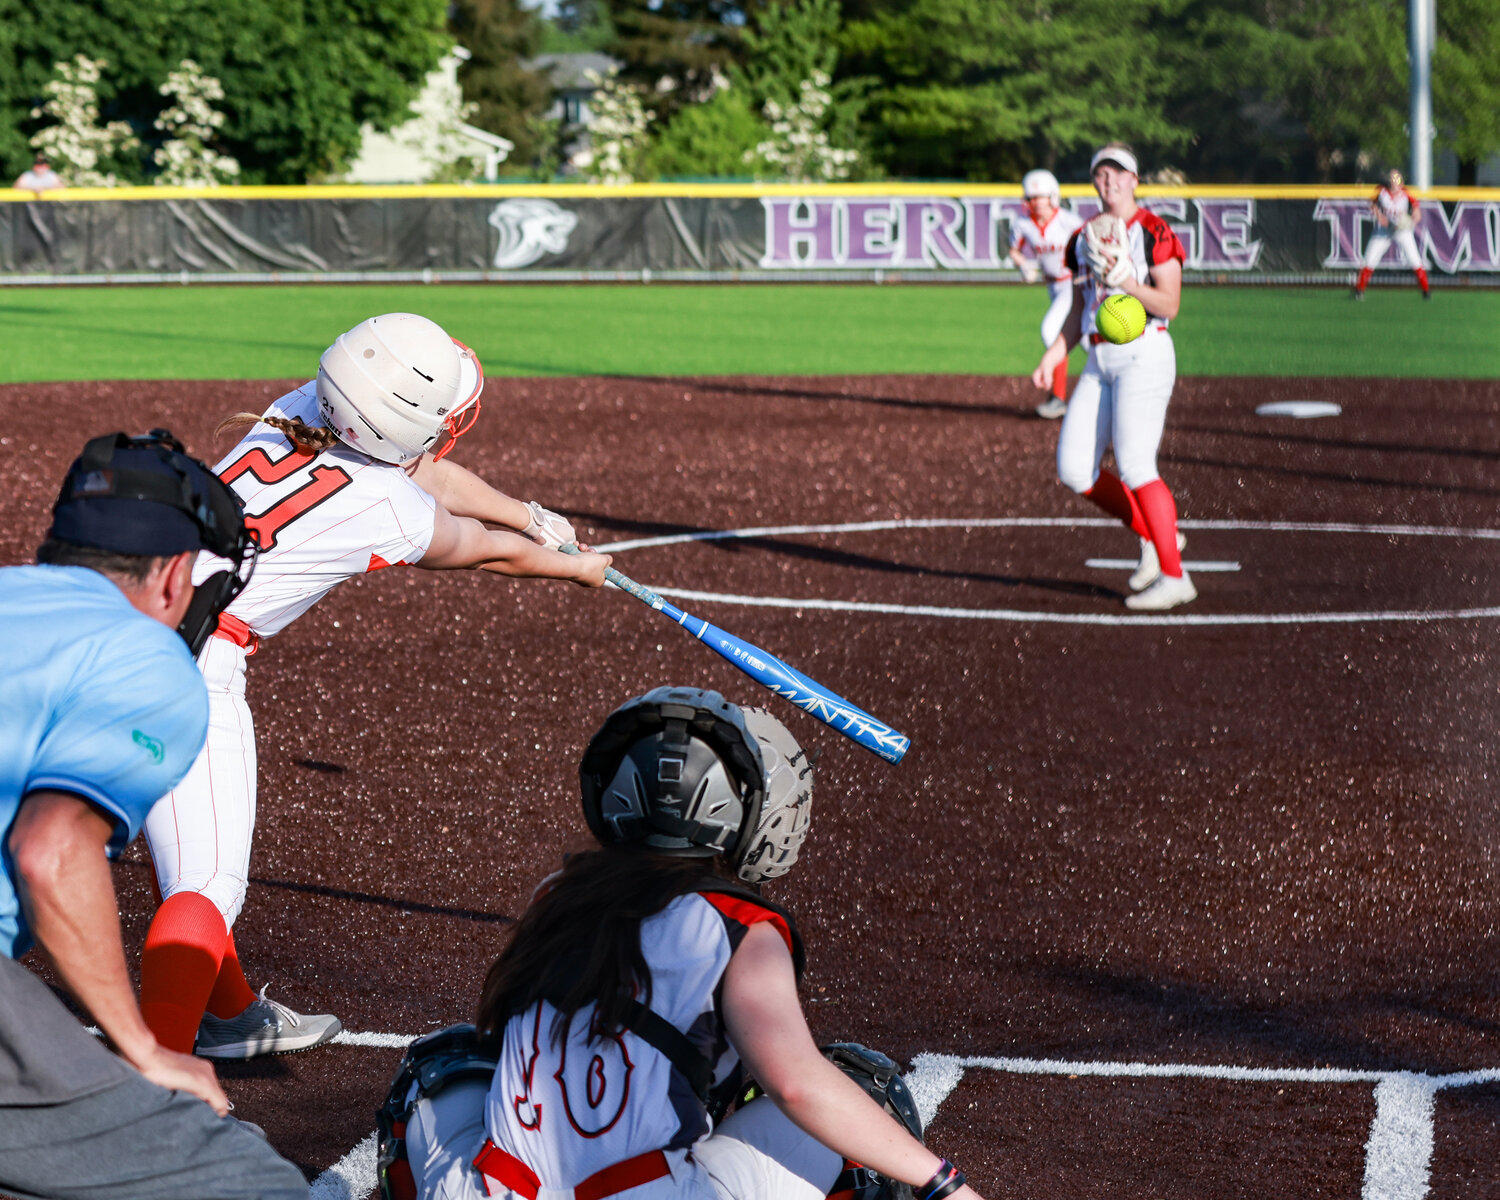 Battle Ground's Brooke Rausch hits a ball for a base hit during the team's 13-0 win over Union on Tuesday, May 16.